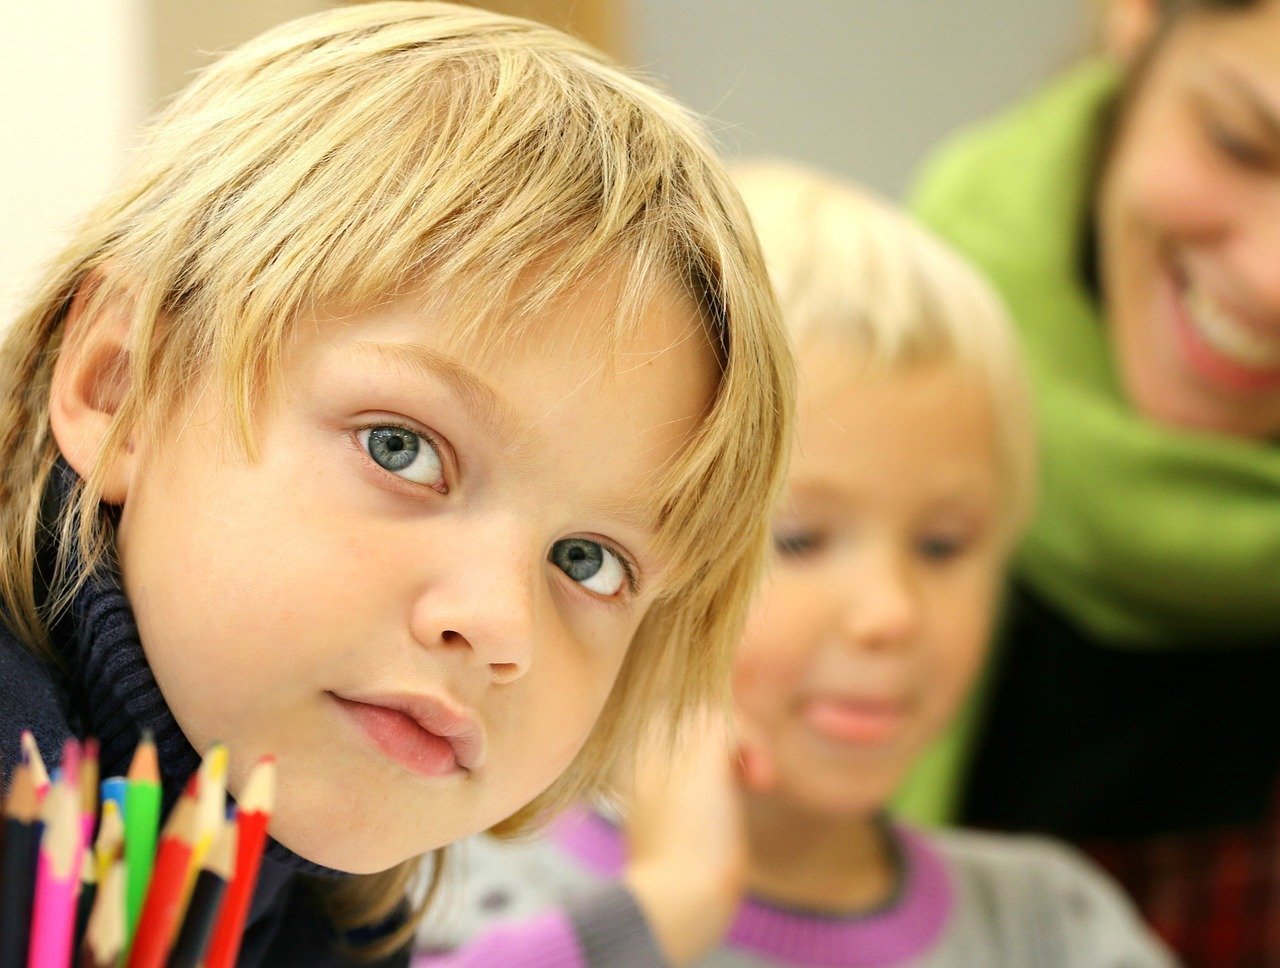 A close up of a child at school. I Image: Pixabay